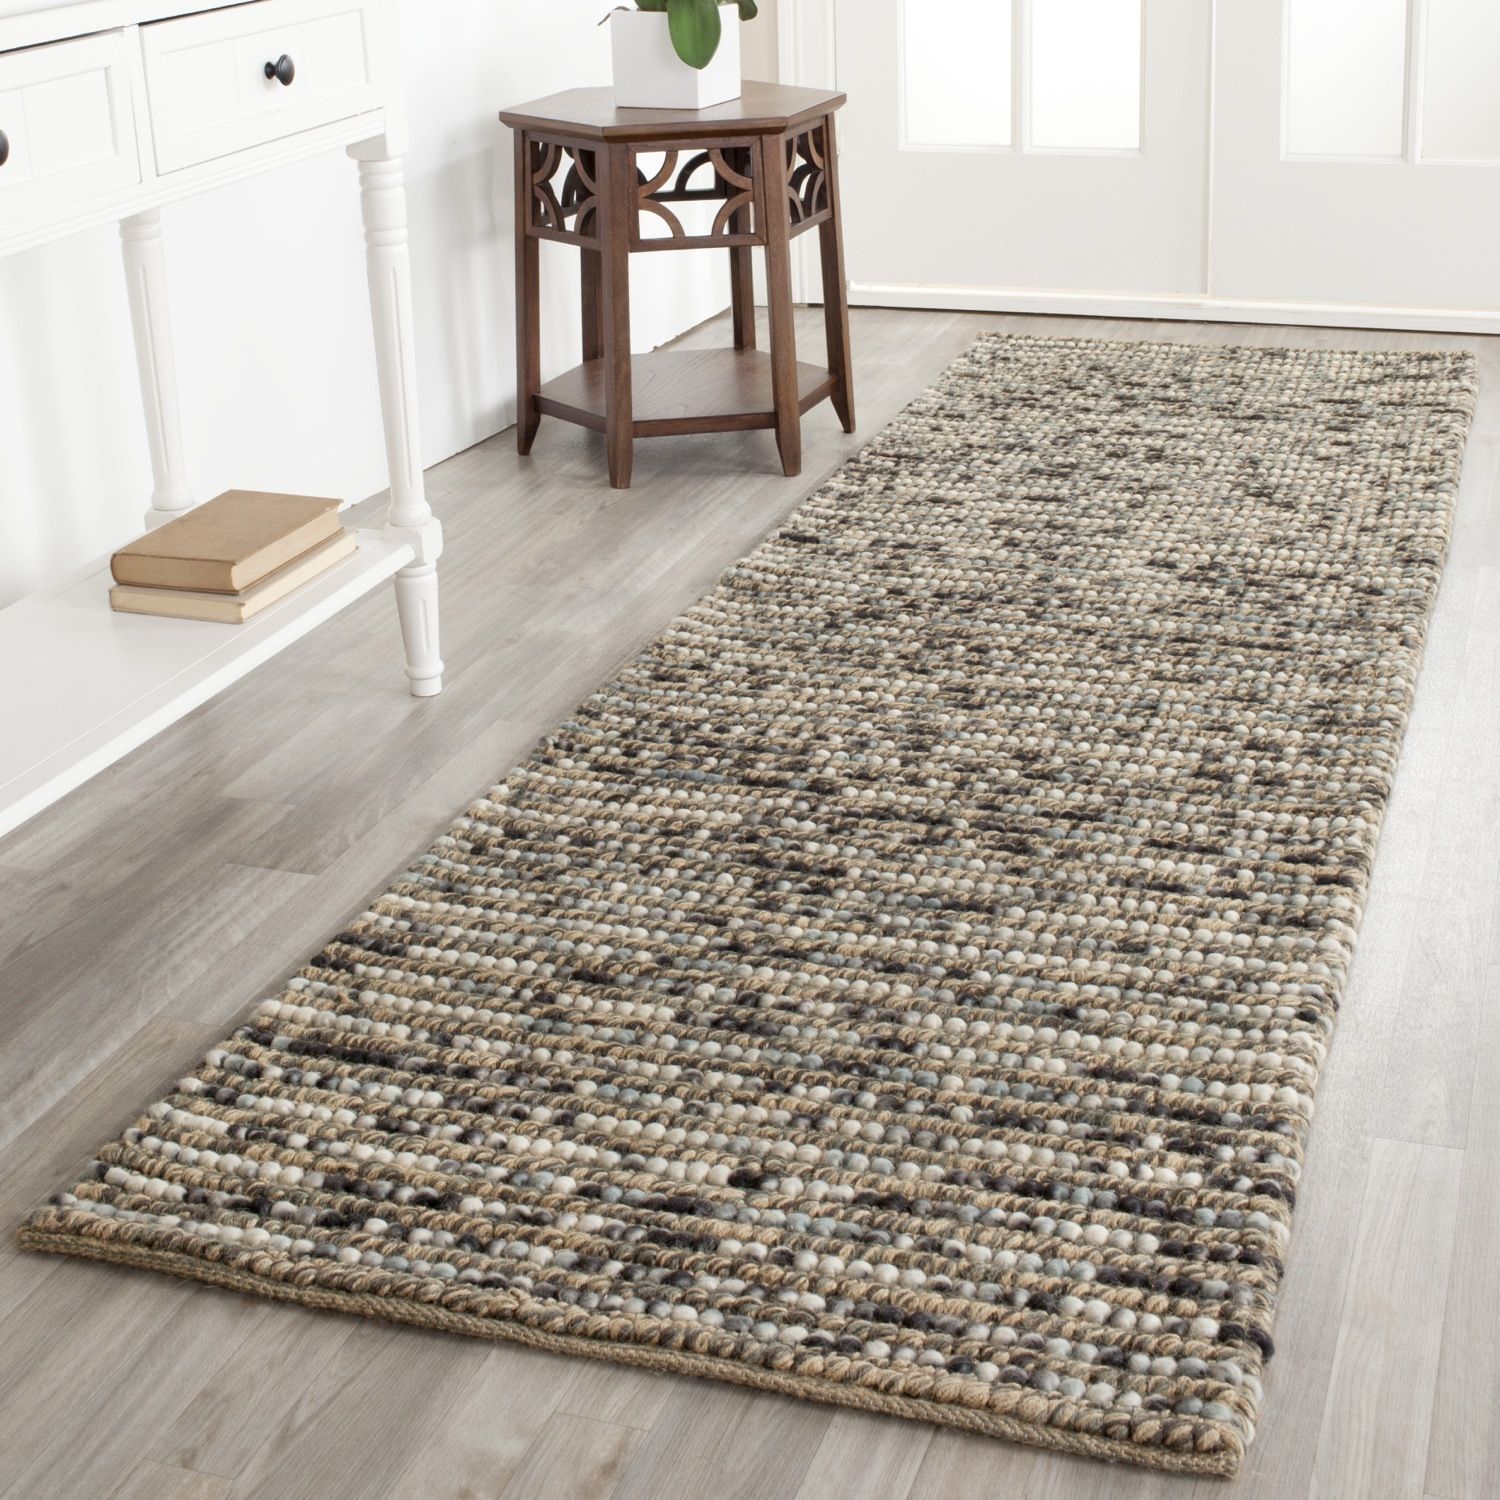 Wool Jute Area Rugs Roselawnlutheran For Natural Wool Area Rugs (Photo 189 of 264)